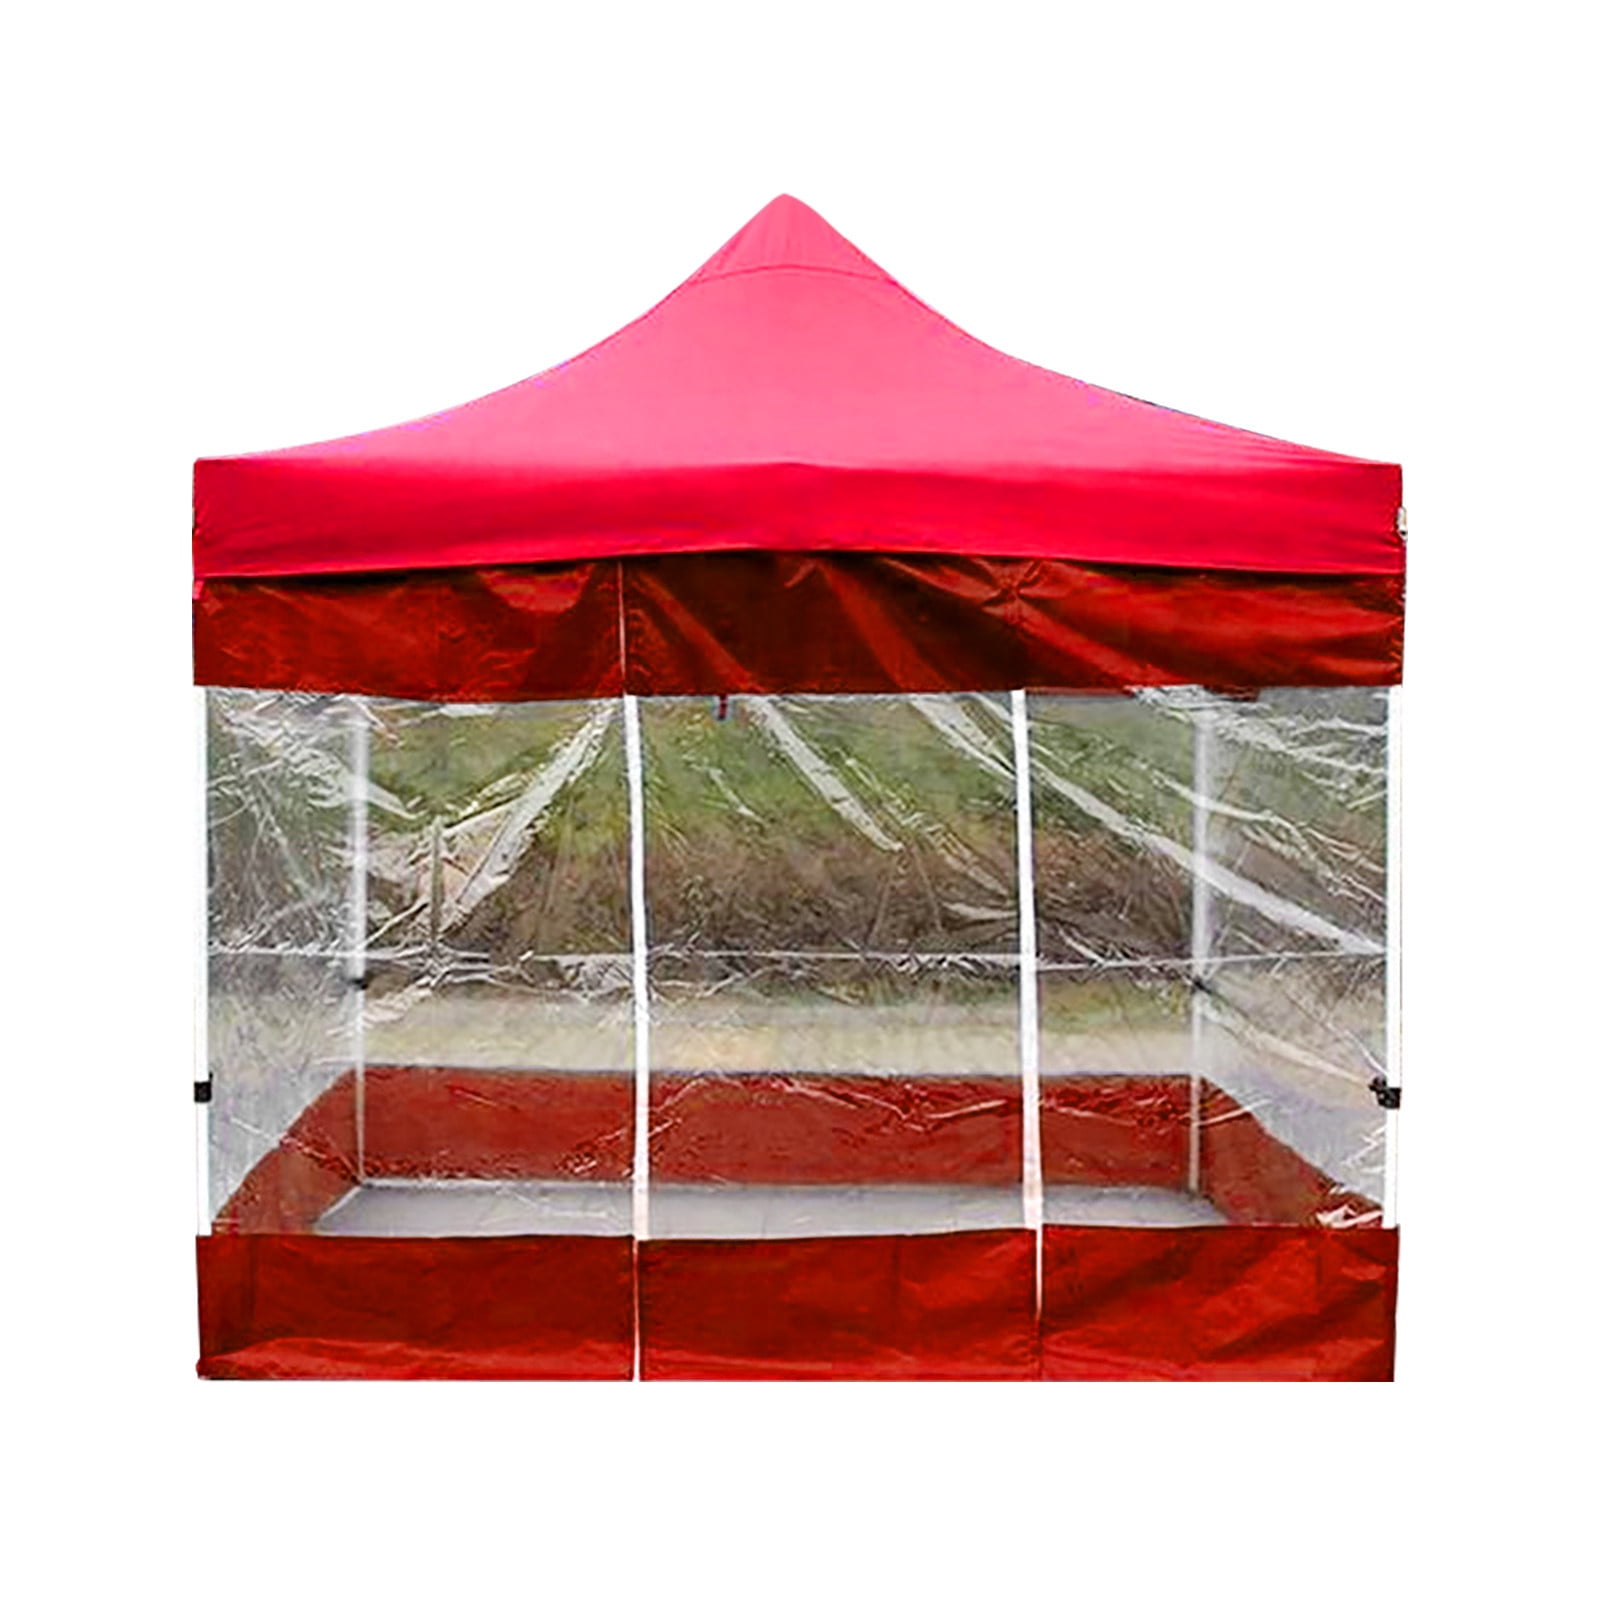 VerPetridure Clearance Outdoor Tent Cloth 210D Oxford Cloth